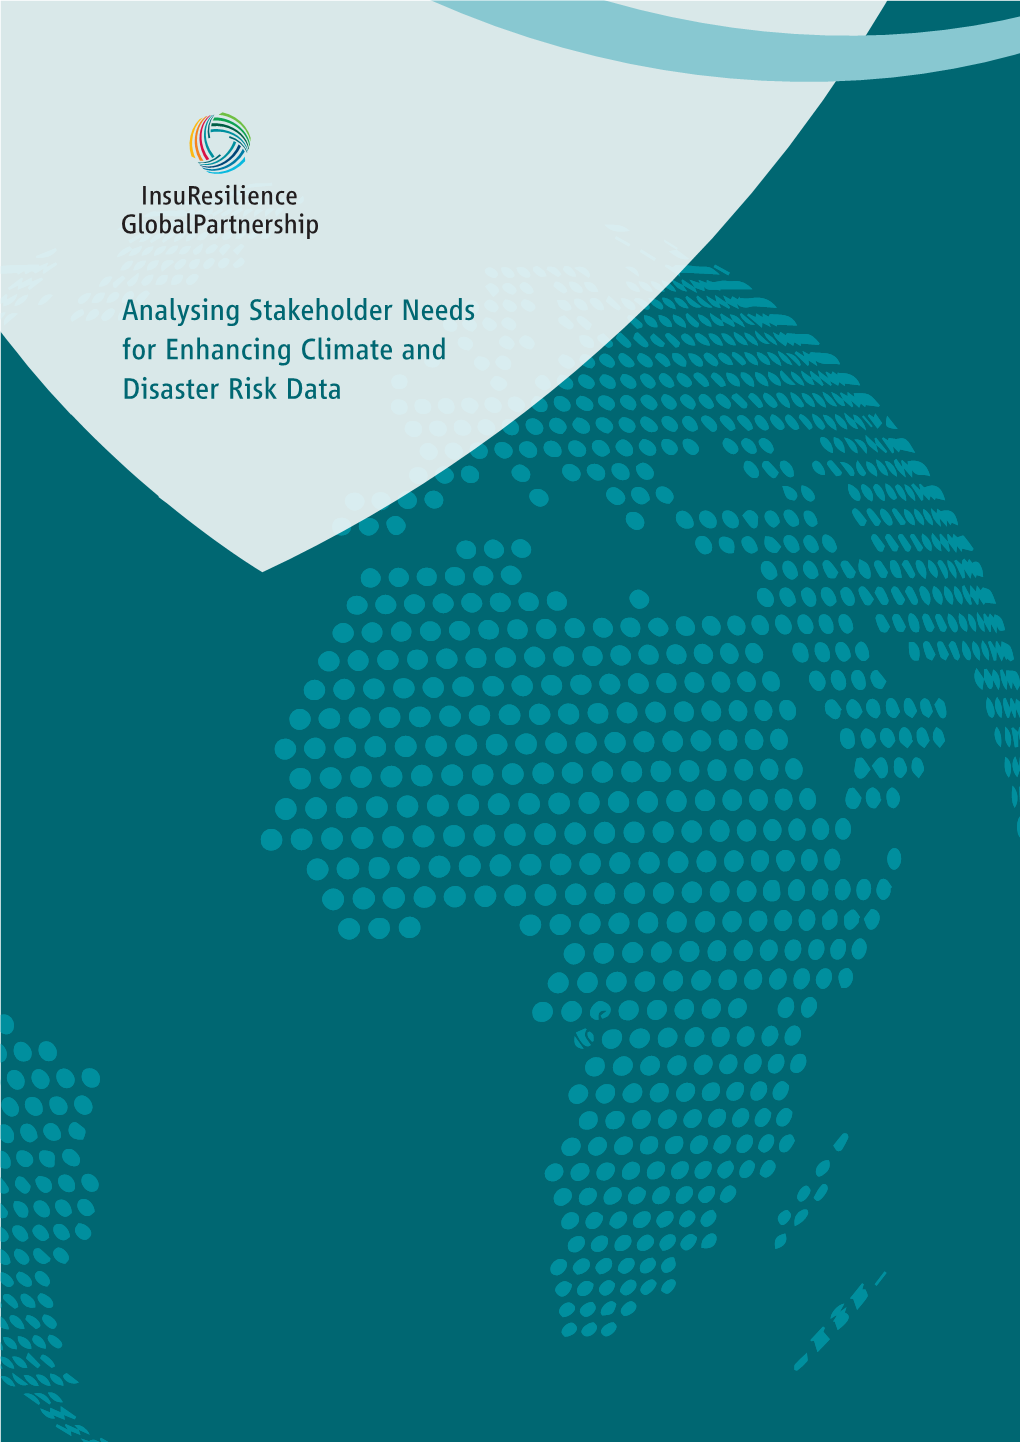 Analysing Stakeholder Needs for Enhancing Climate and Disaster Risk Data